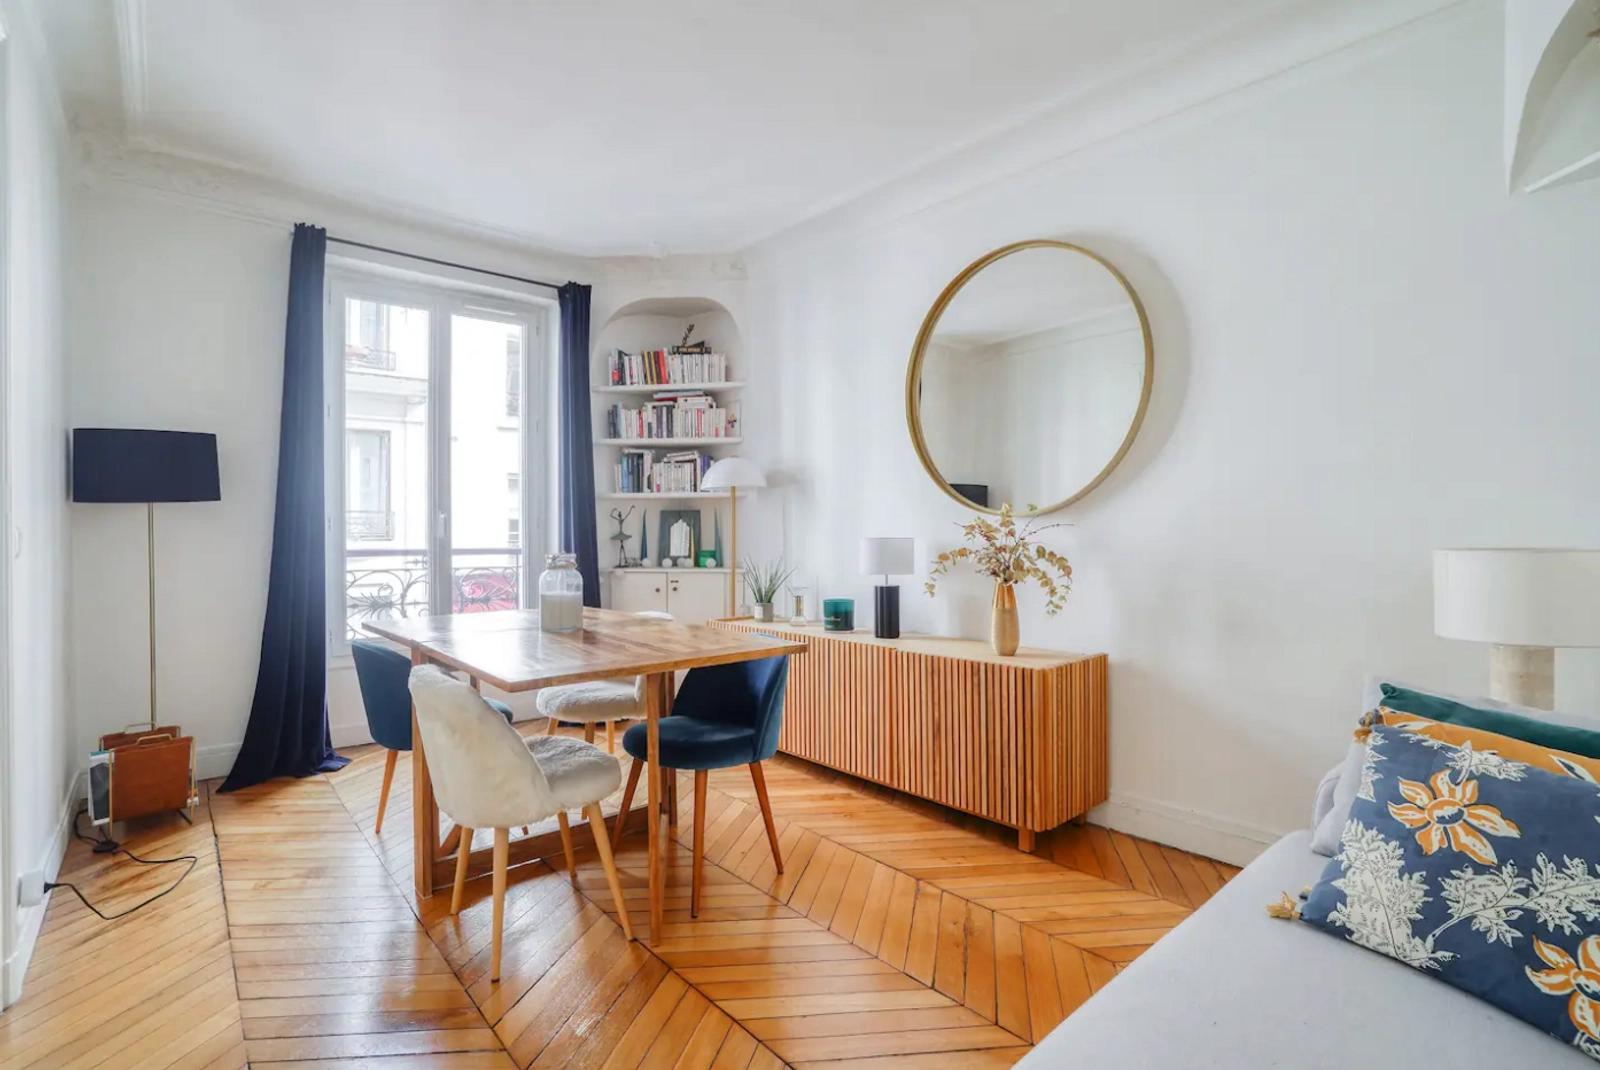 Space Haussmann apartment in the heart of Pigalle - 2